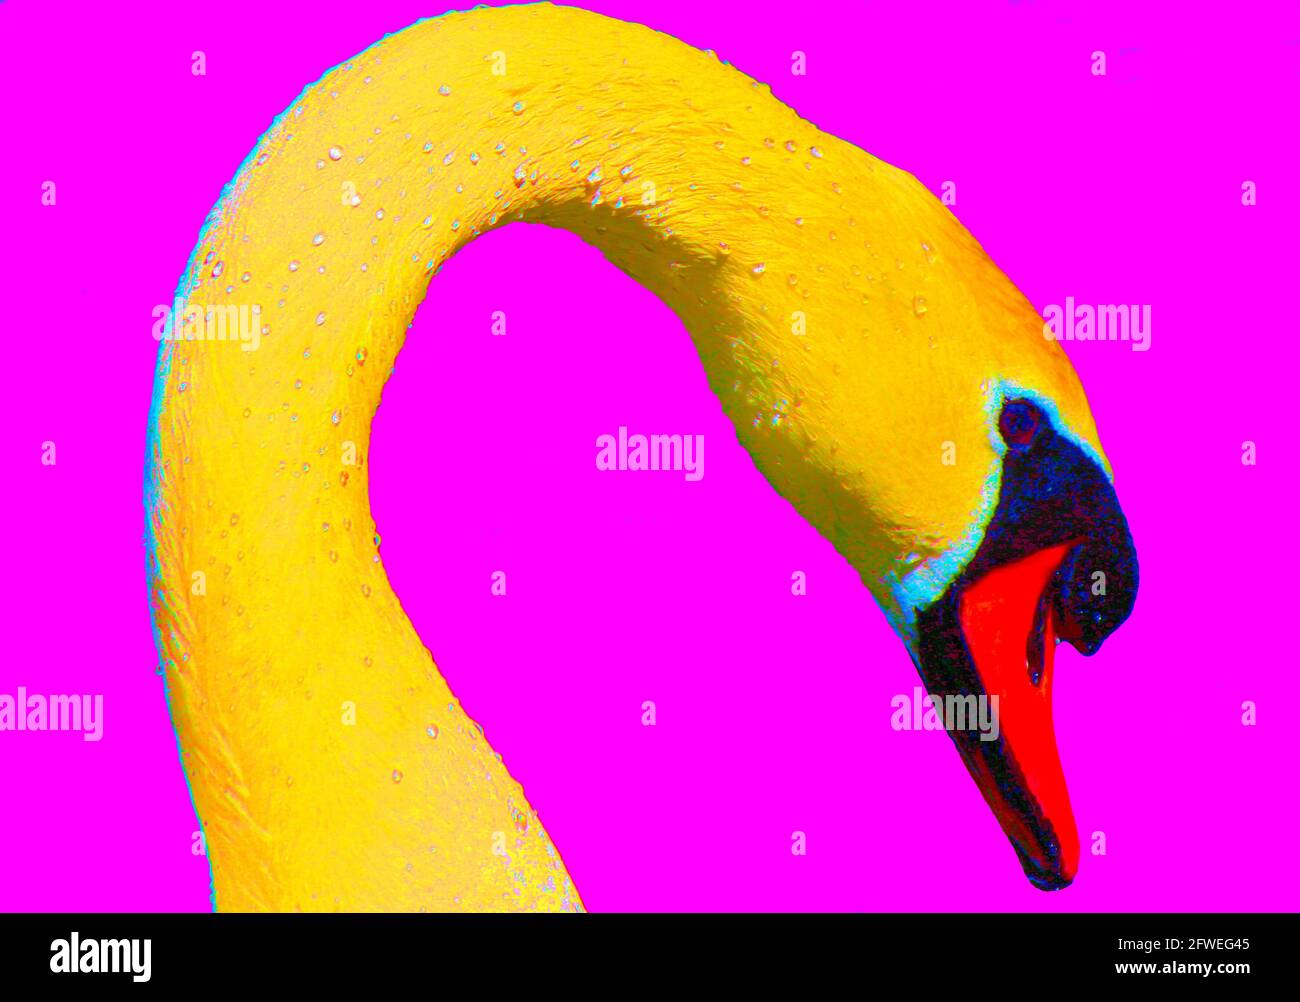 Majestic swan, turned into pop art. Vogue swan posing against fluorescent pink background. Yellow swan, light blue and yellow feathers, orange beak. Stock Photo